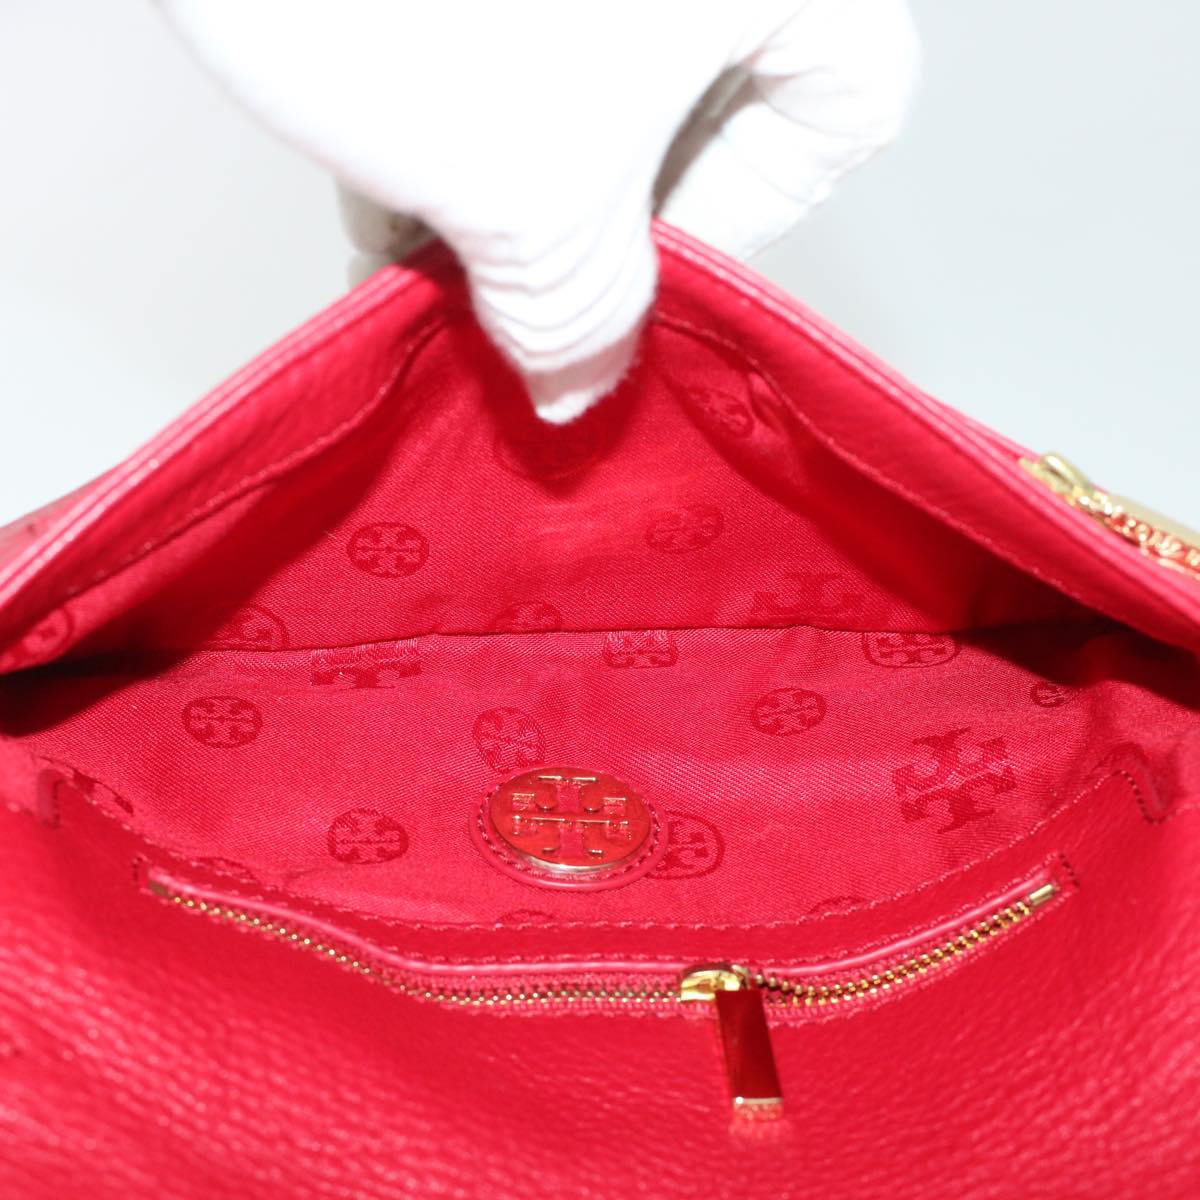 TORY BURCH Chain Shoulder Bag Leather Red HSP037 Auth am4539